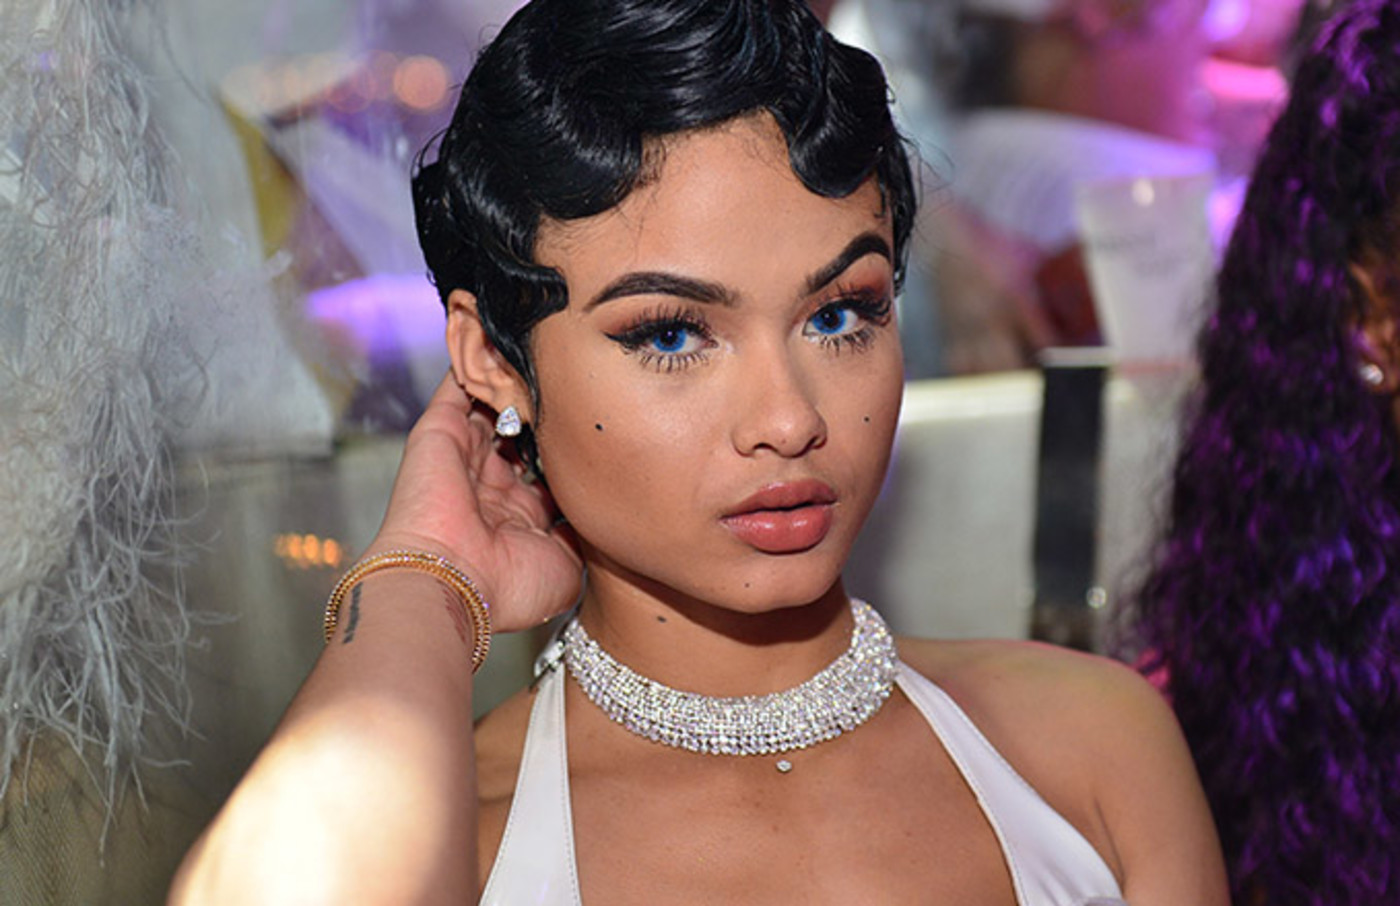 Who is india love westbrooks